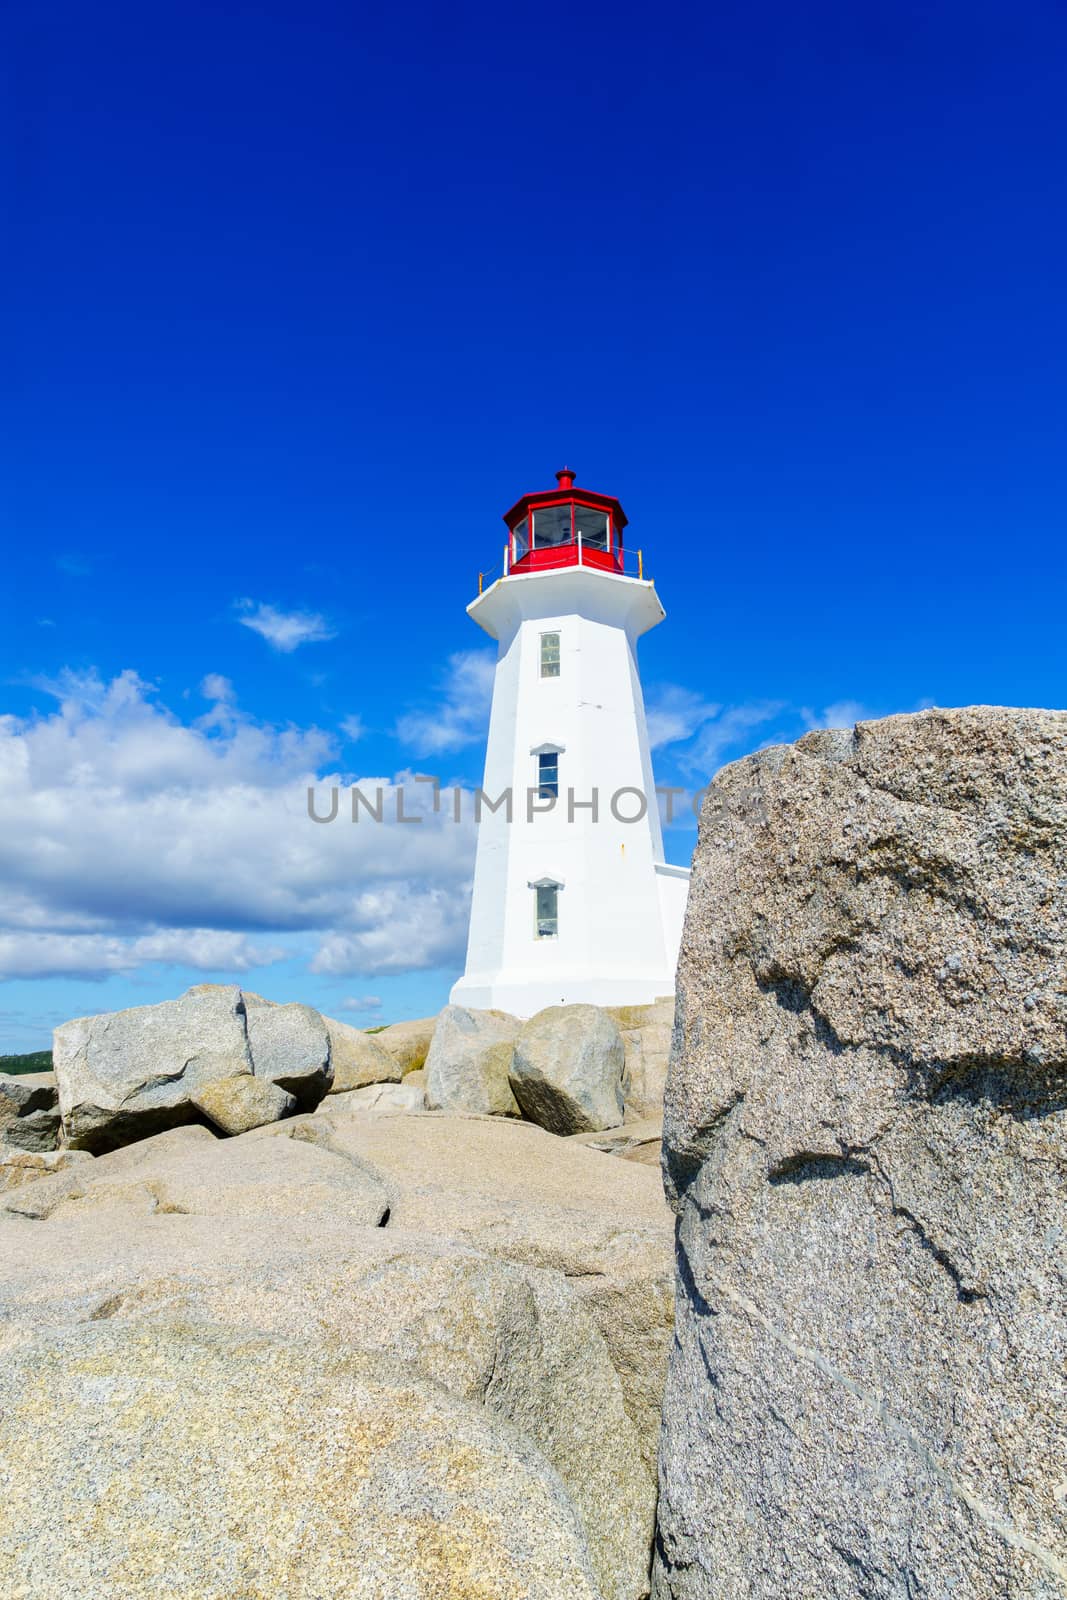 Lighthouse of the fishing village Peggys Cove by RnDmS